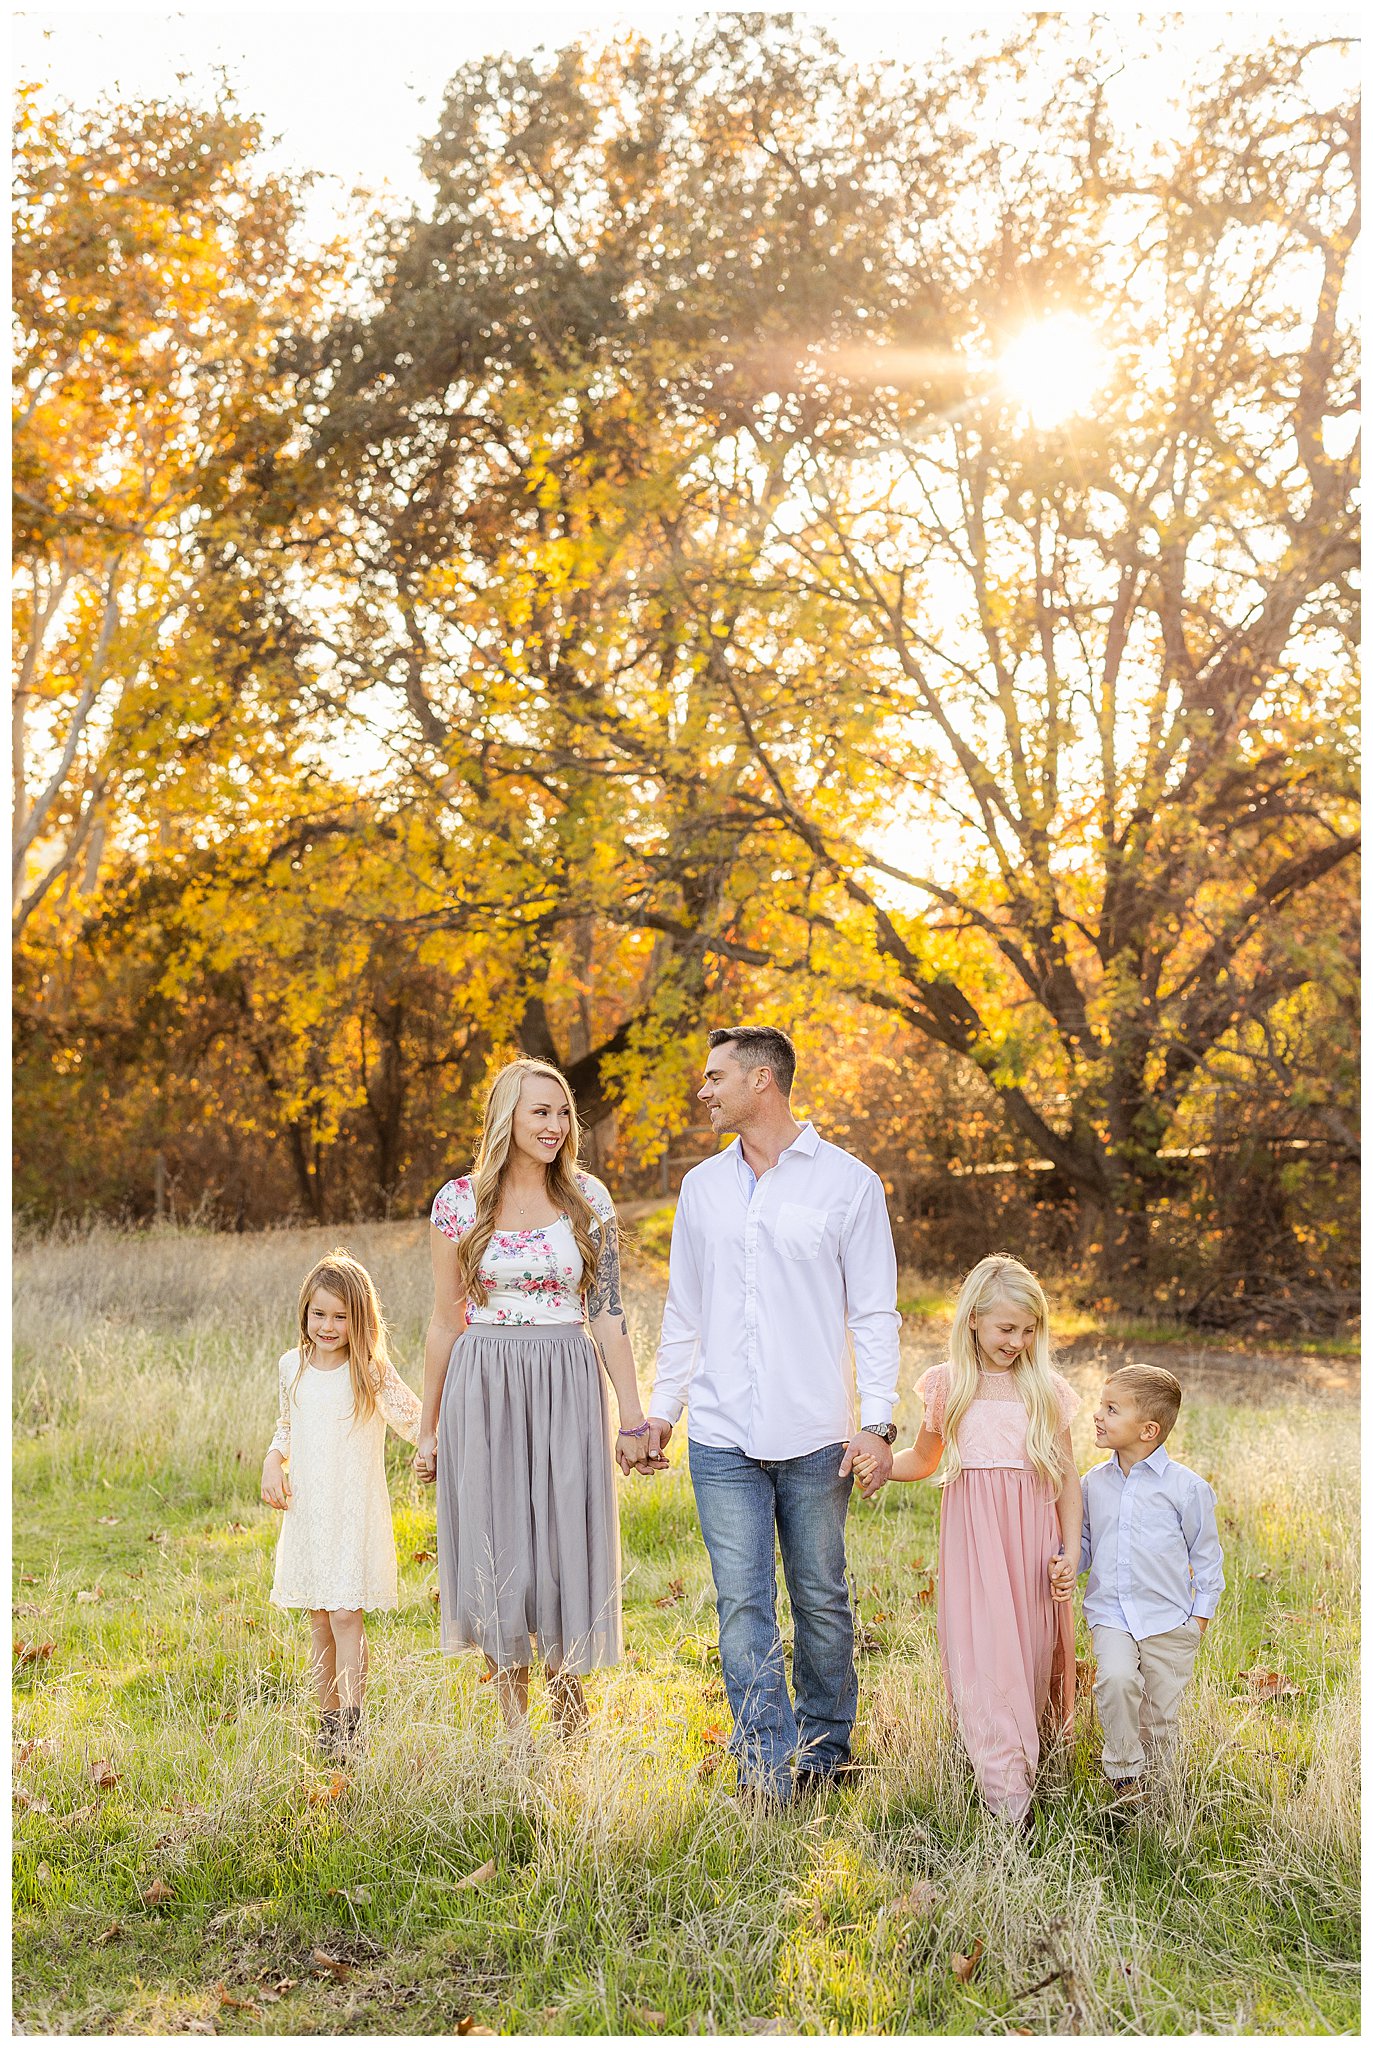 Walk in the Park in Light Pastels for Family Session | Jeni + Nick